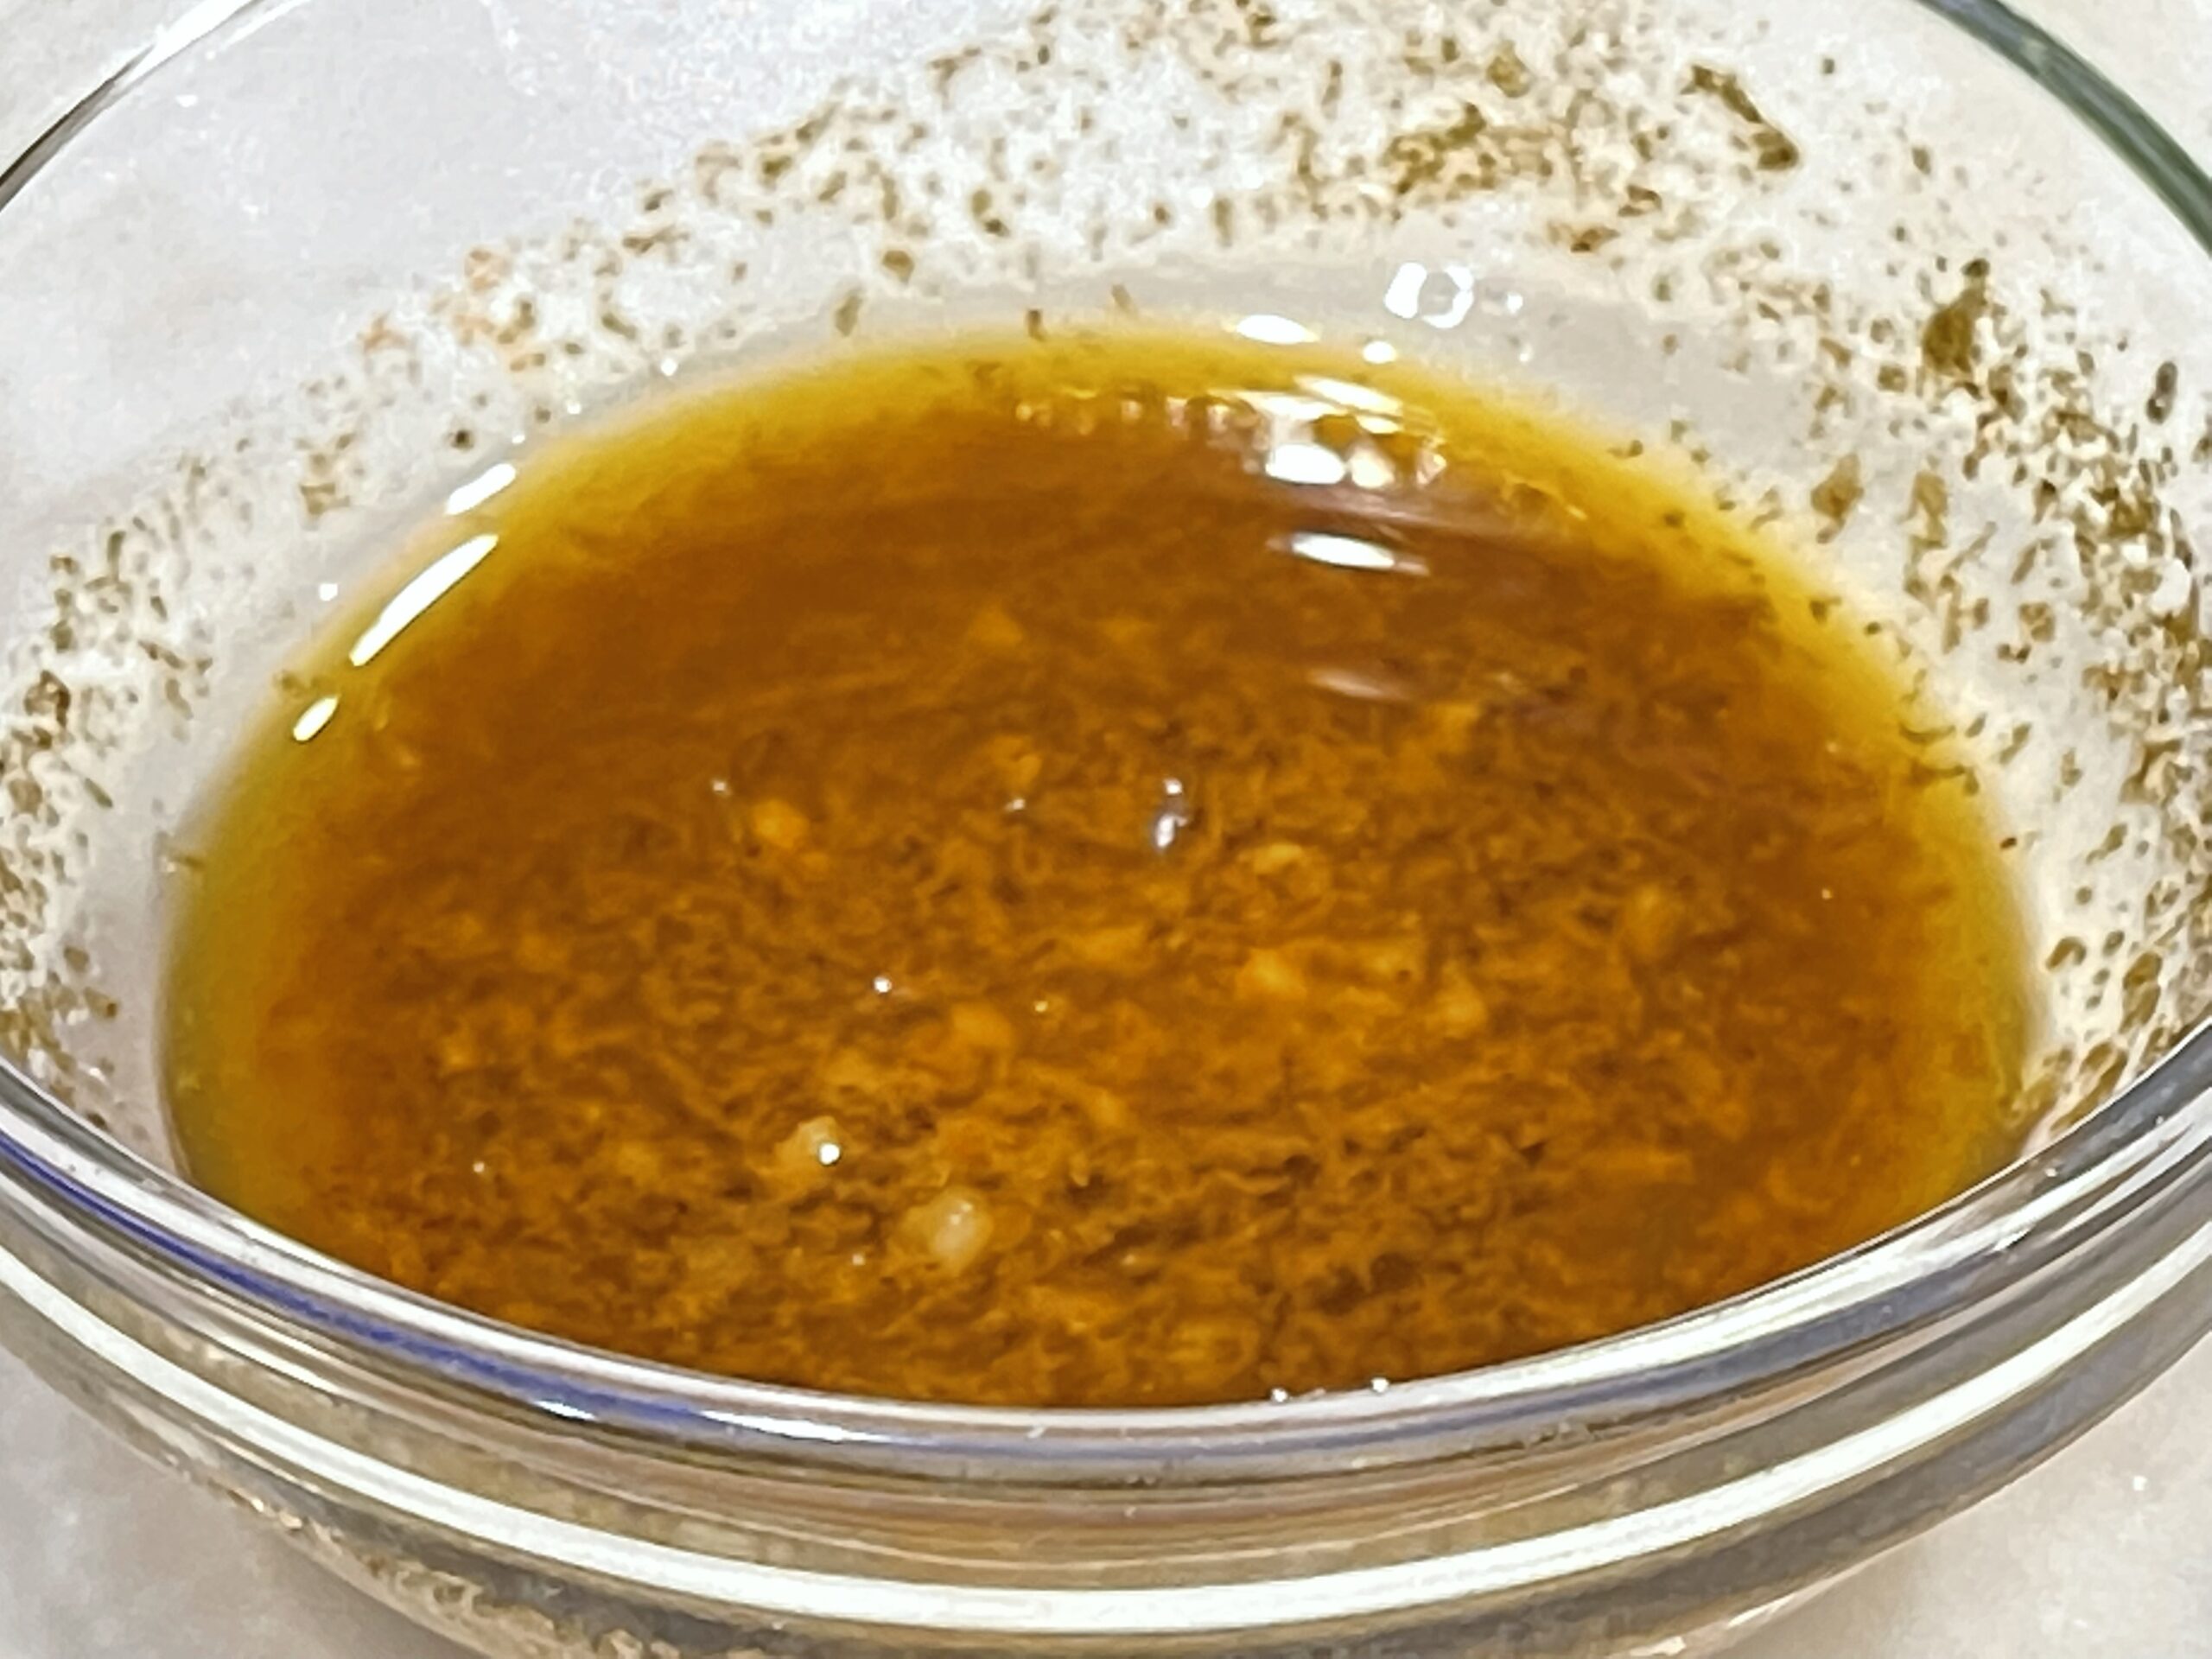 Image of mixed sauce for 15 Minute Chicken Street Tacos.